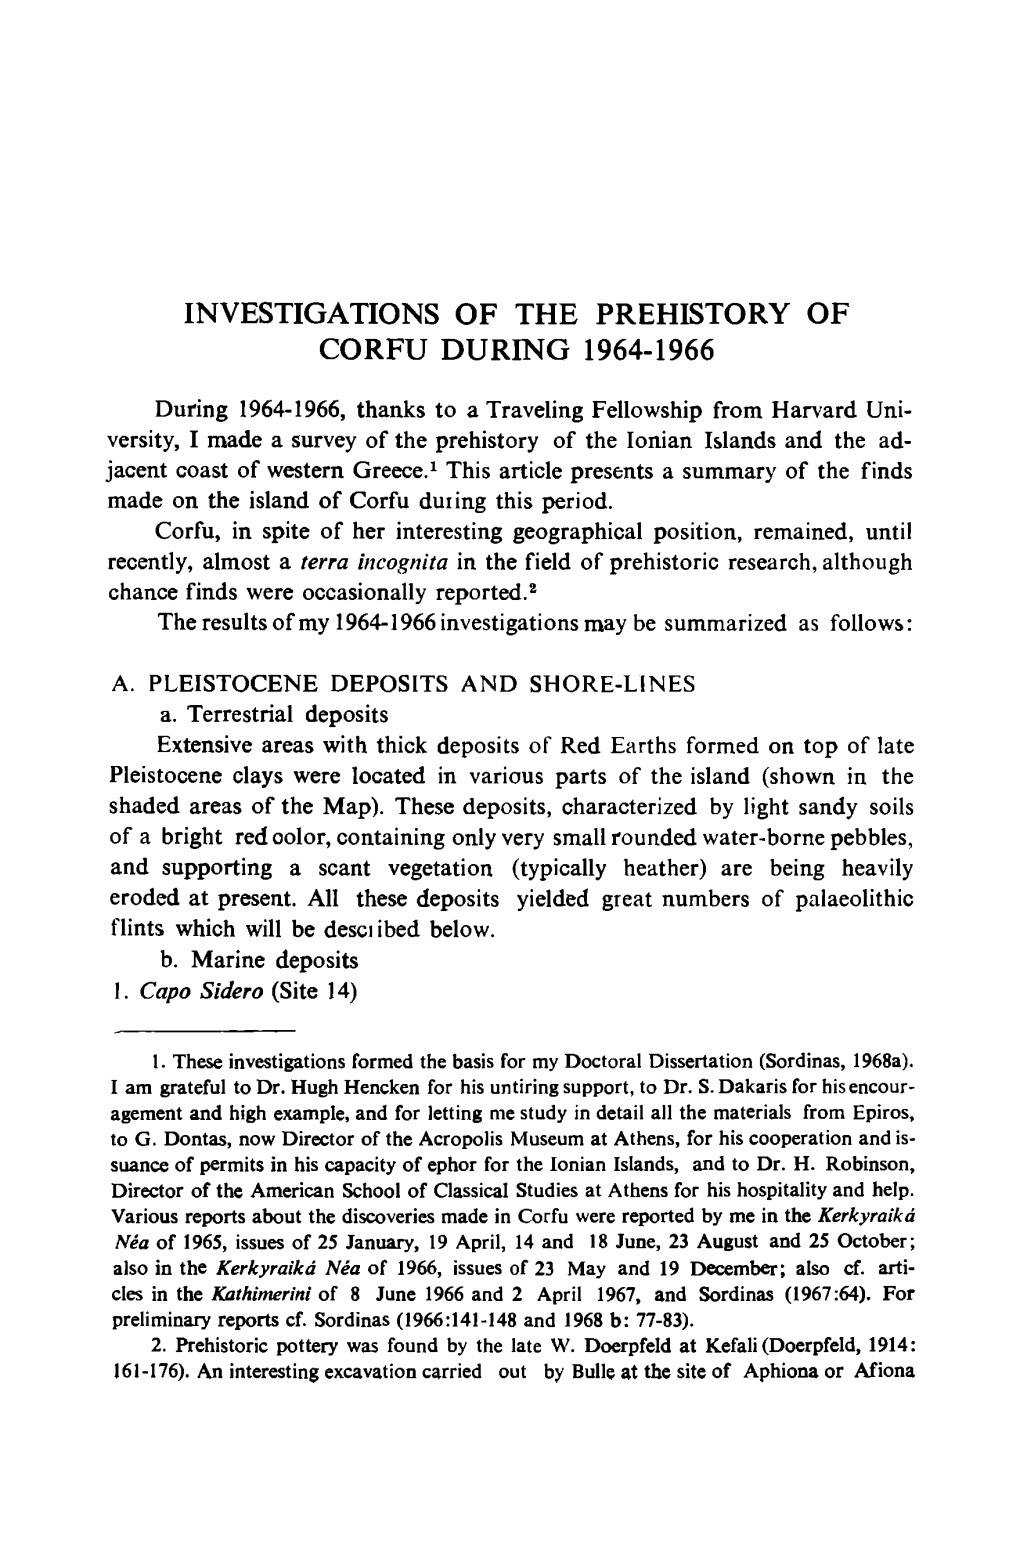 Investigations of the Prehistory of Corfu During 1964-1966